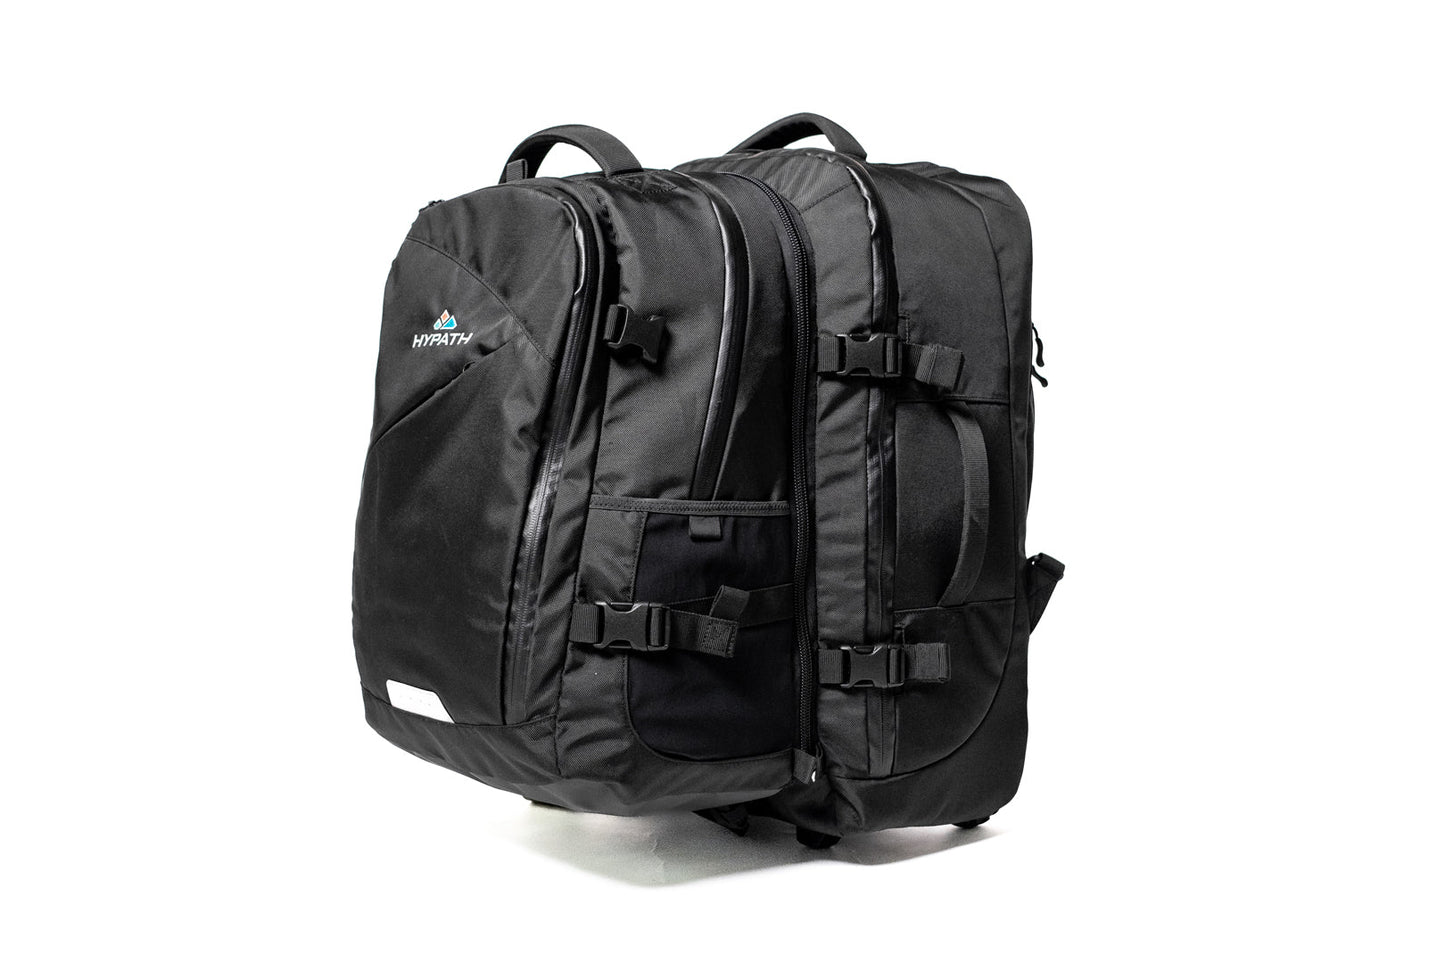 Hypath 2-in-1 Transformer Backpack (Out of Stock until late July) - Click "Update Me" in Sidebar to Get Notice When We are Back in Stock